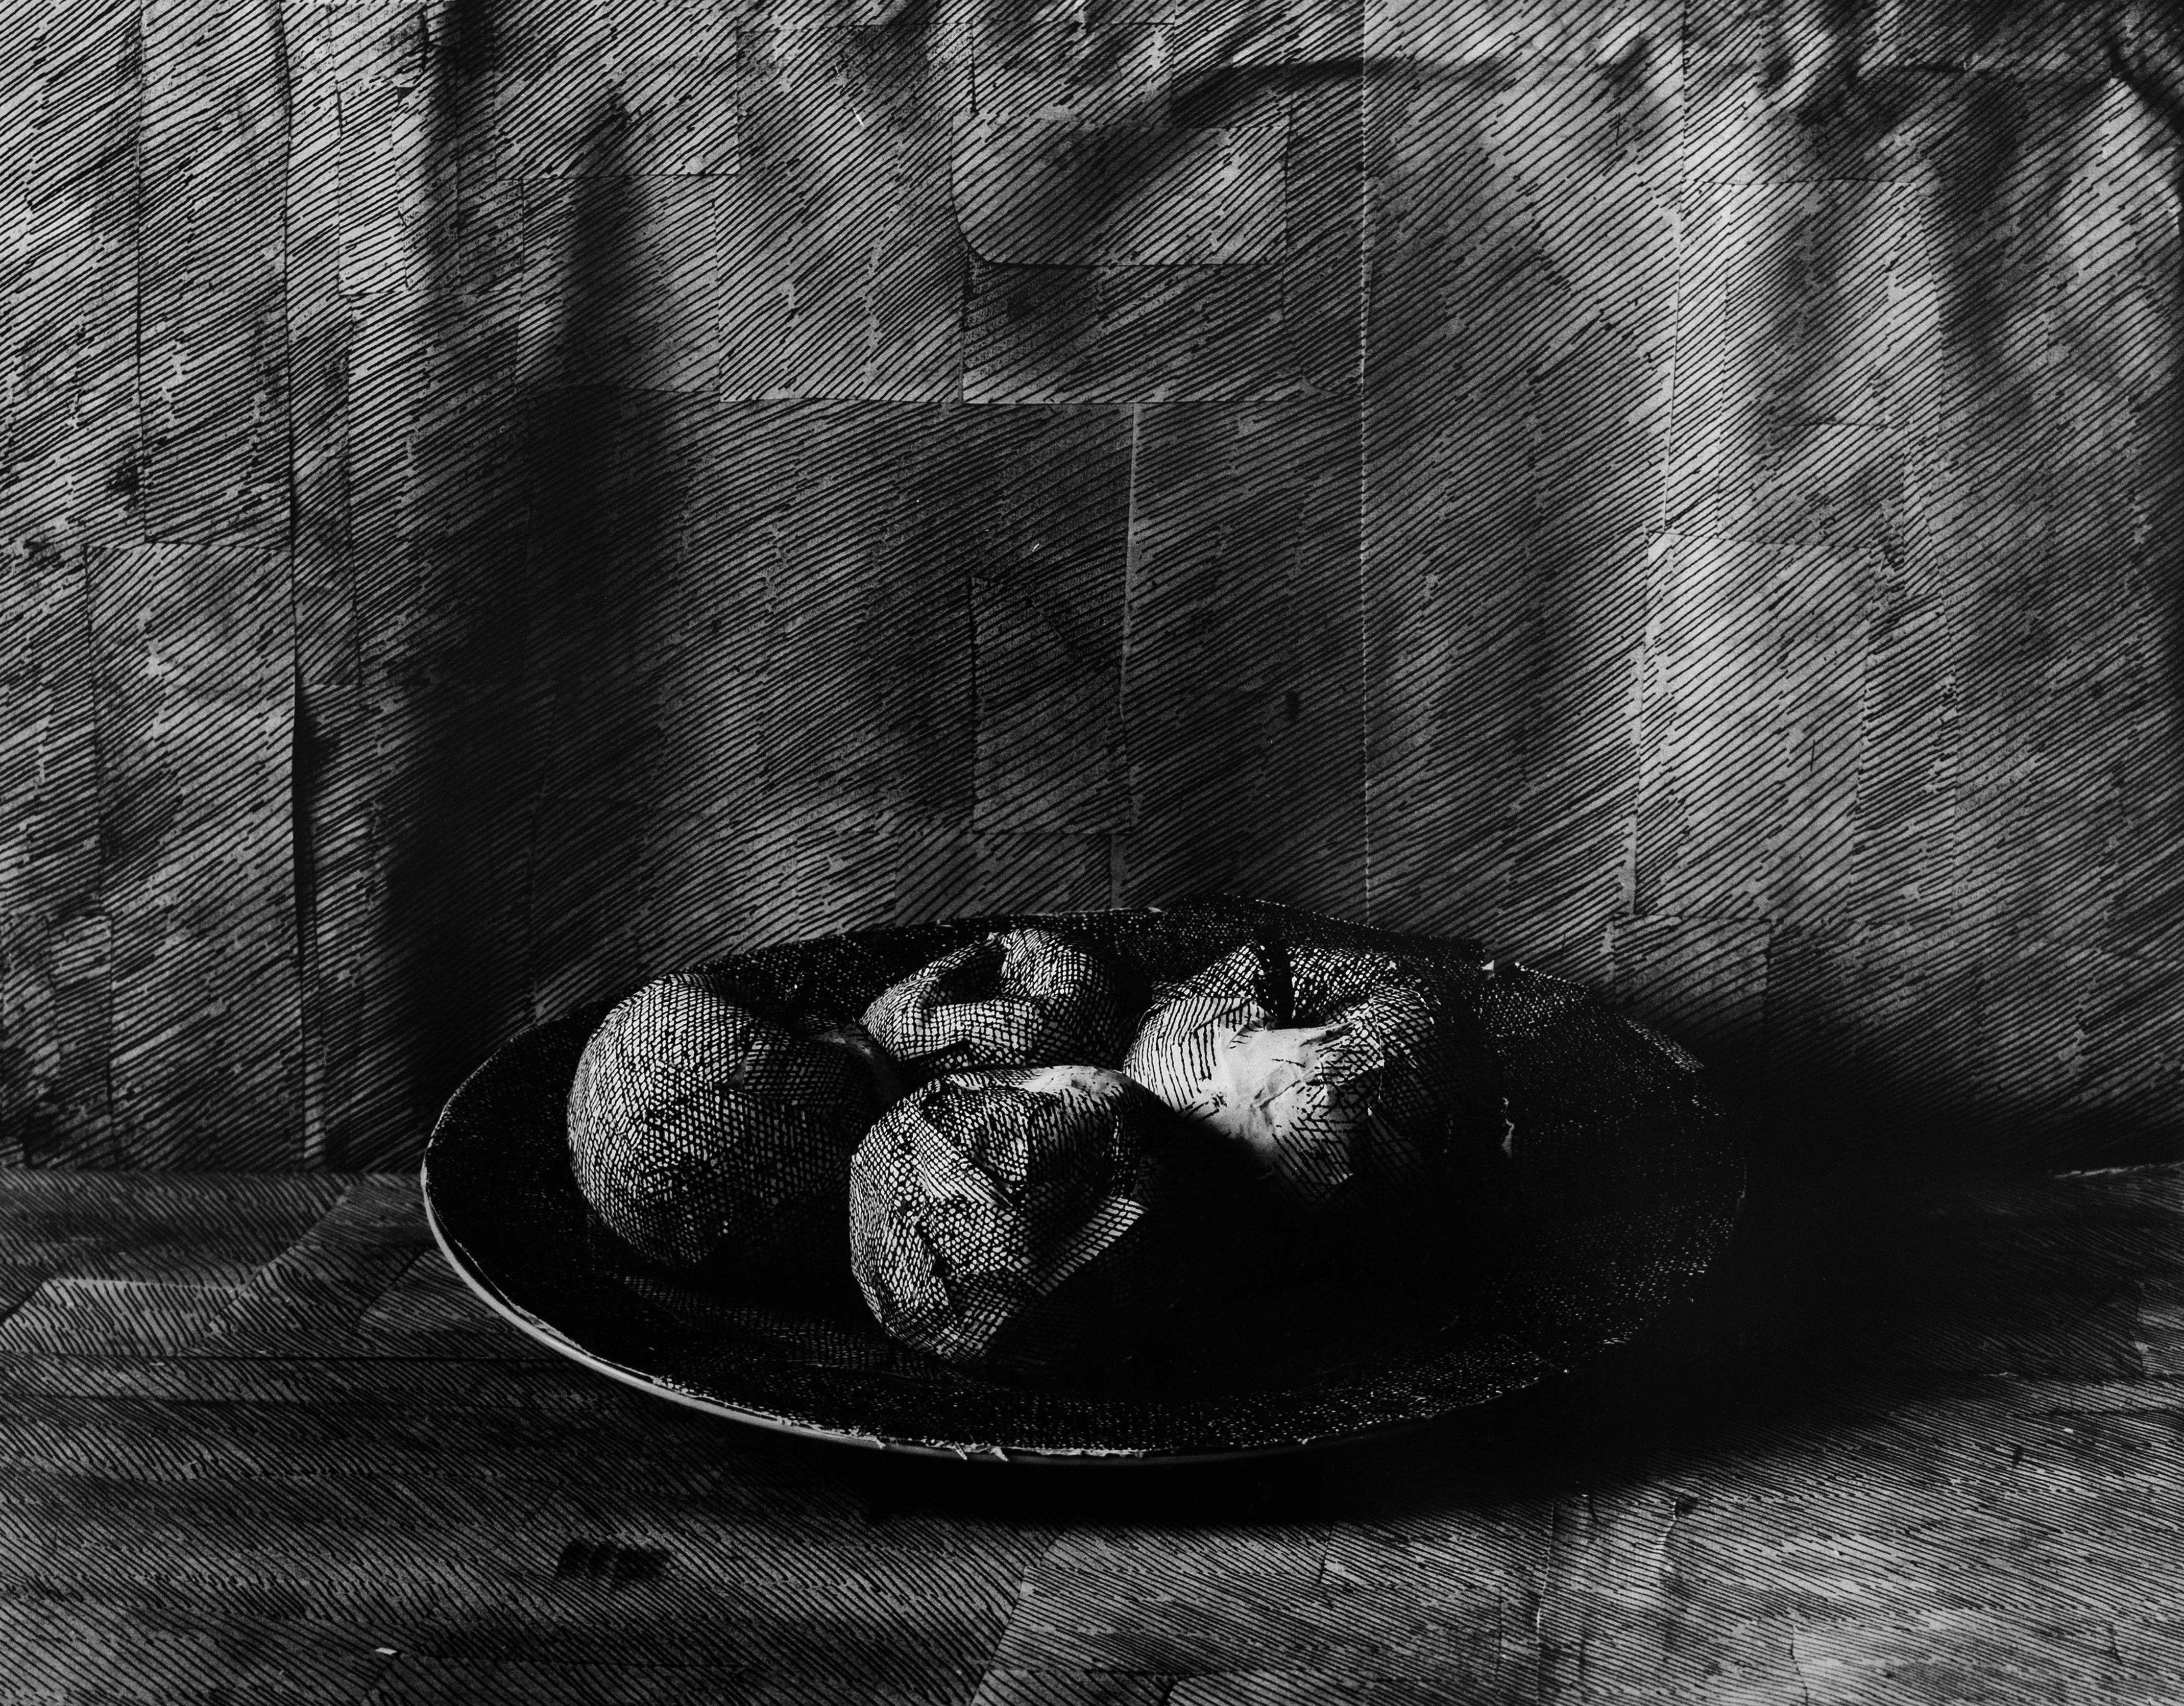 Alexandra Catiere Black and White Photograph - Photo of drawing on paper, wrapped around apples. Black and White photography.